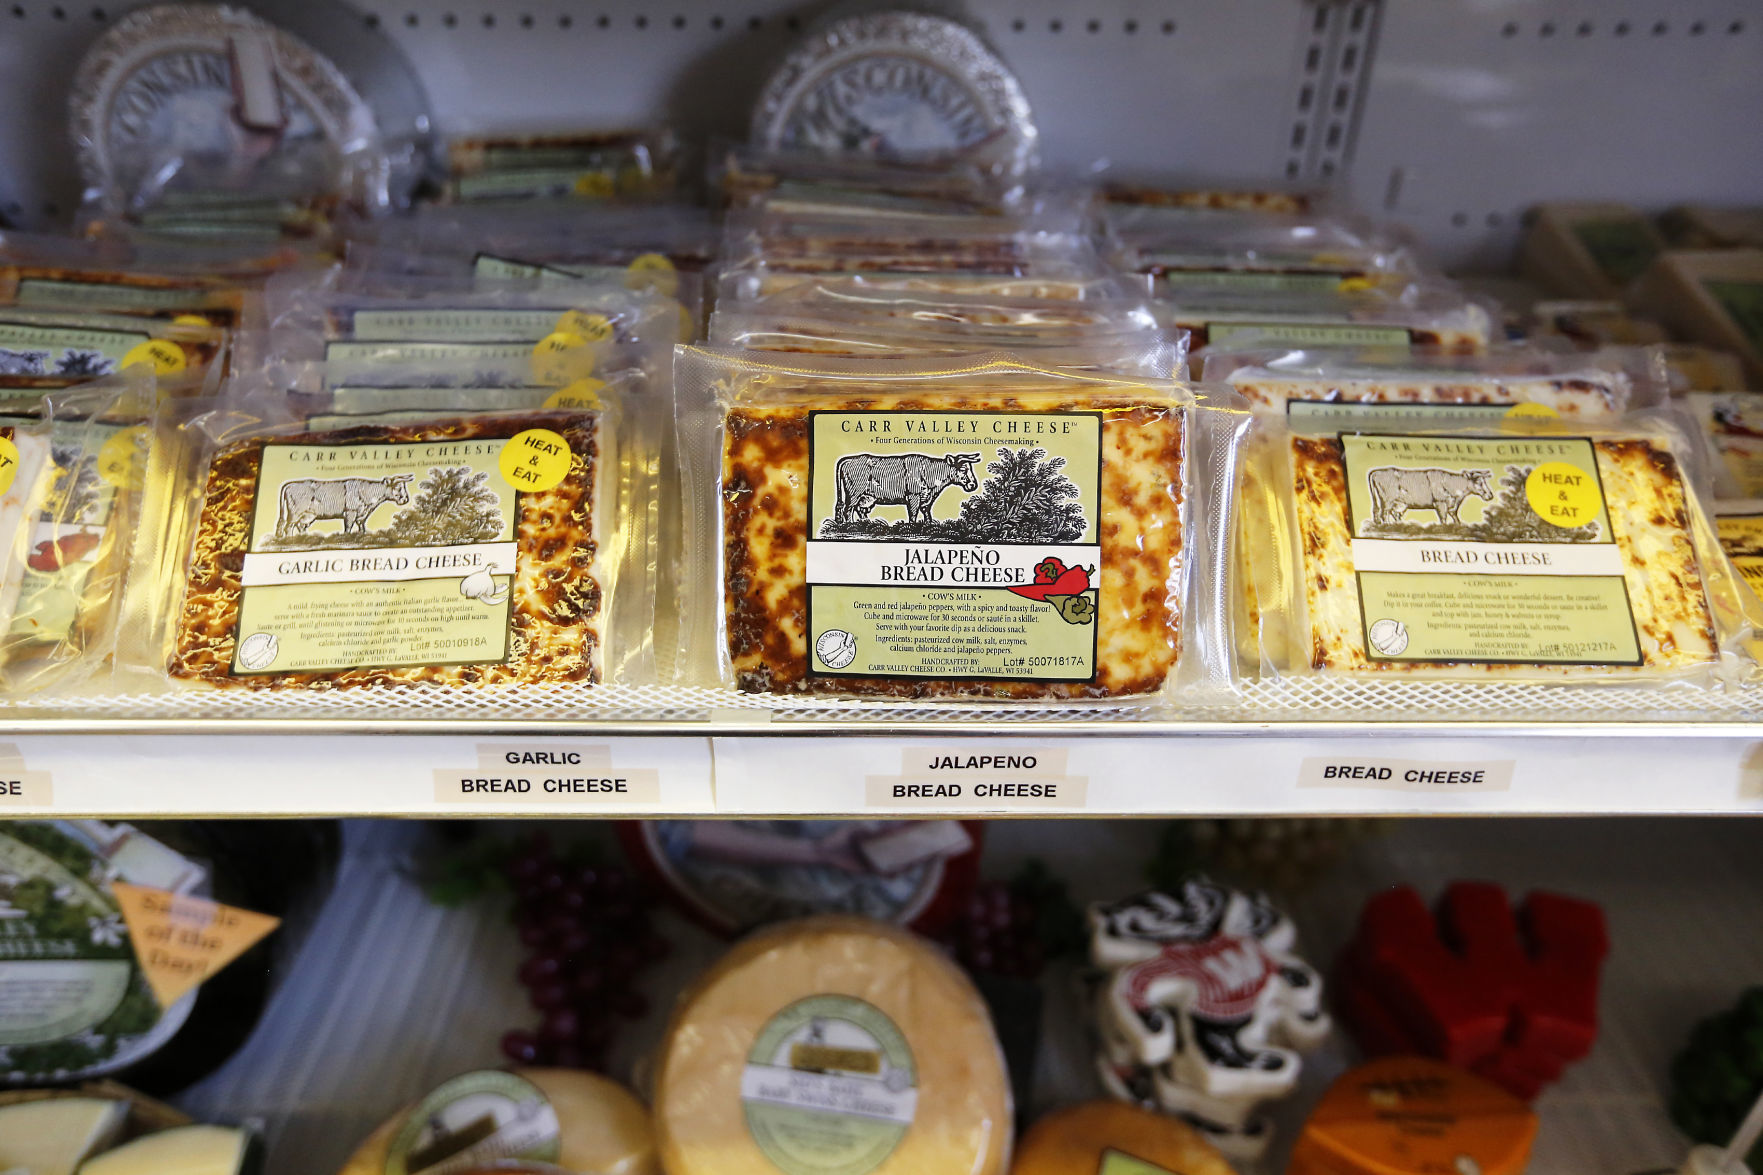 The Carr Valley Cheese Company sells different flavors of bread cheese at their location in Fennimore, Wis.    PHOTO CREDIT: EILEEN MESLAR